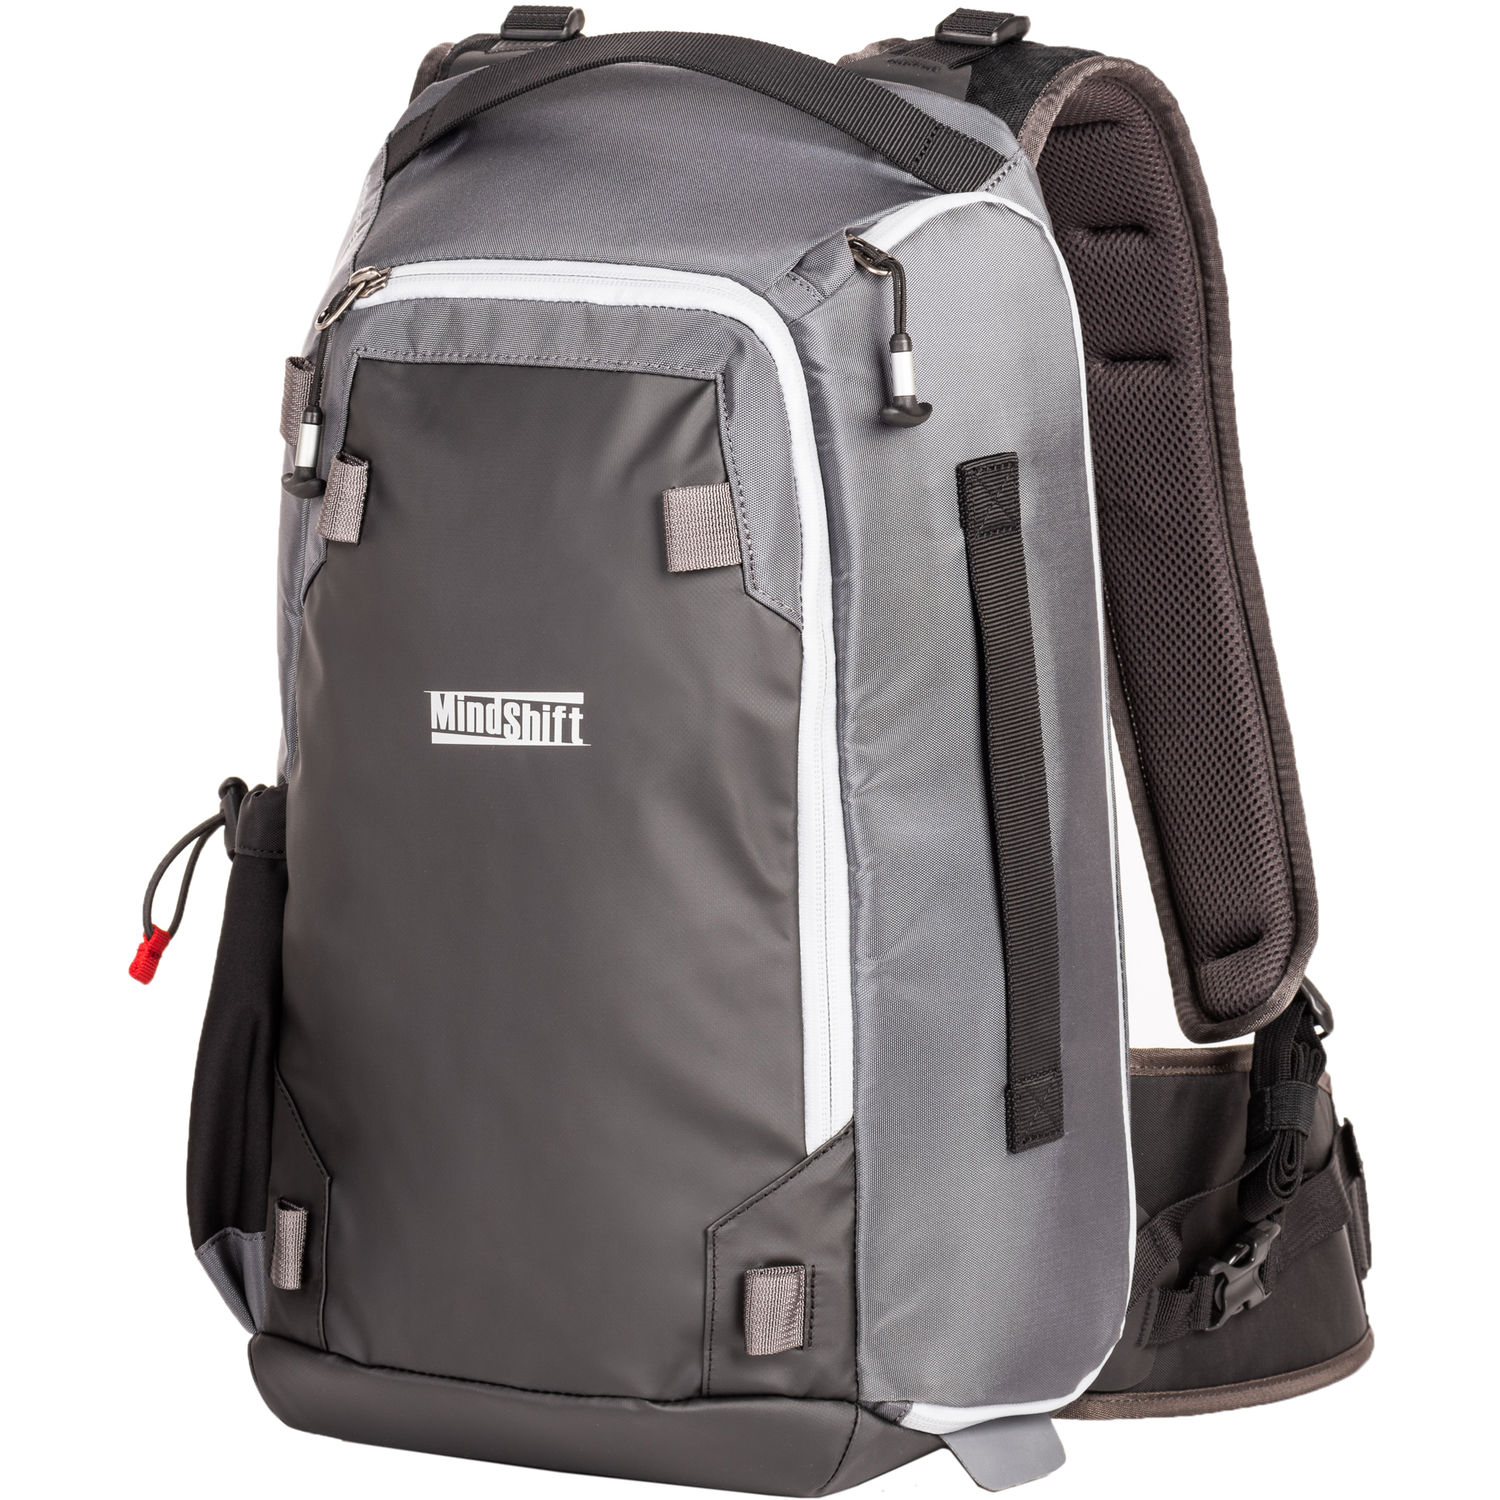 MindShift PhotoCross 13 Backpack 520426 (Carbon Gray)